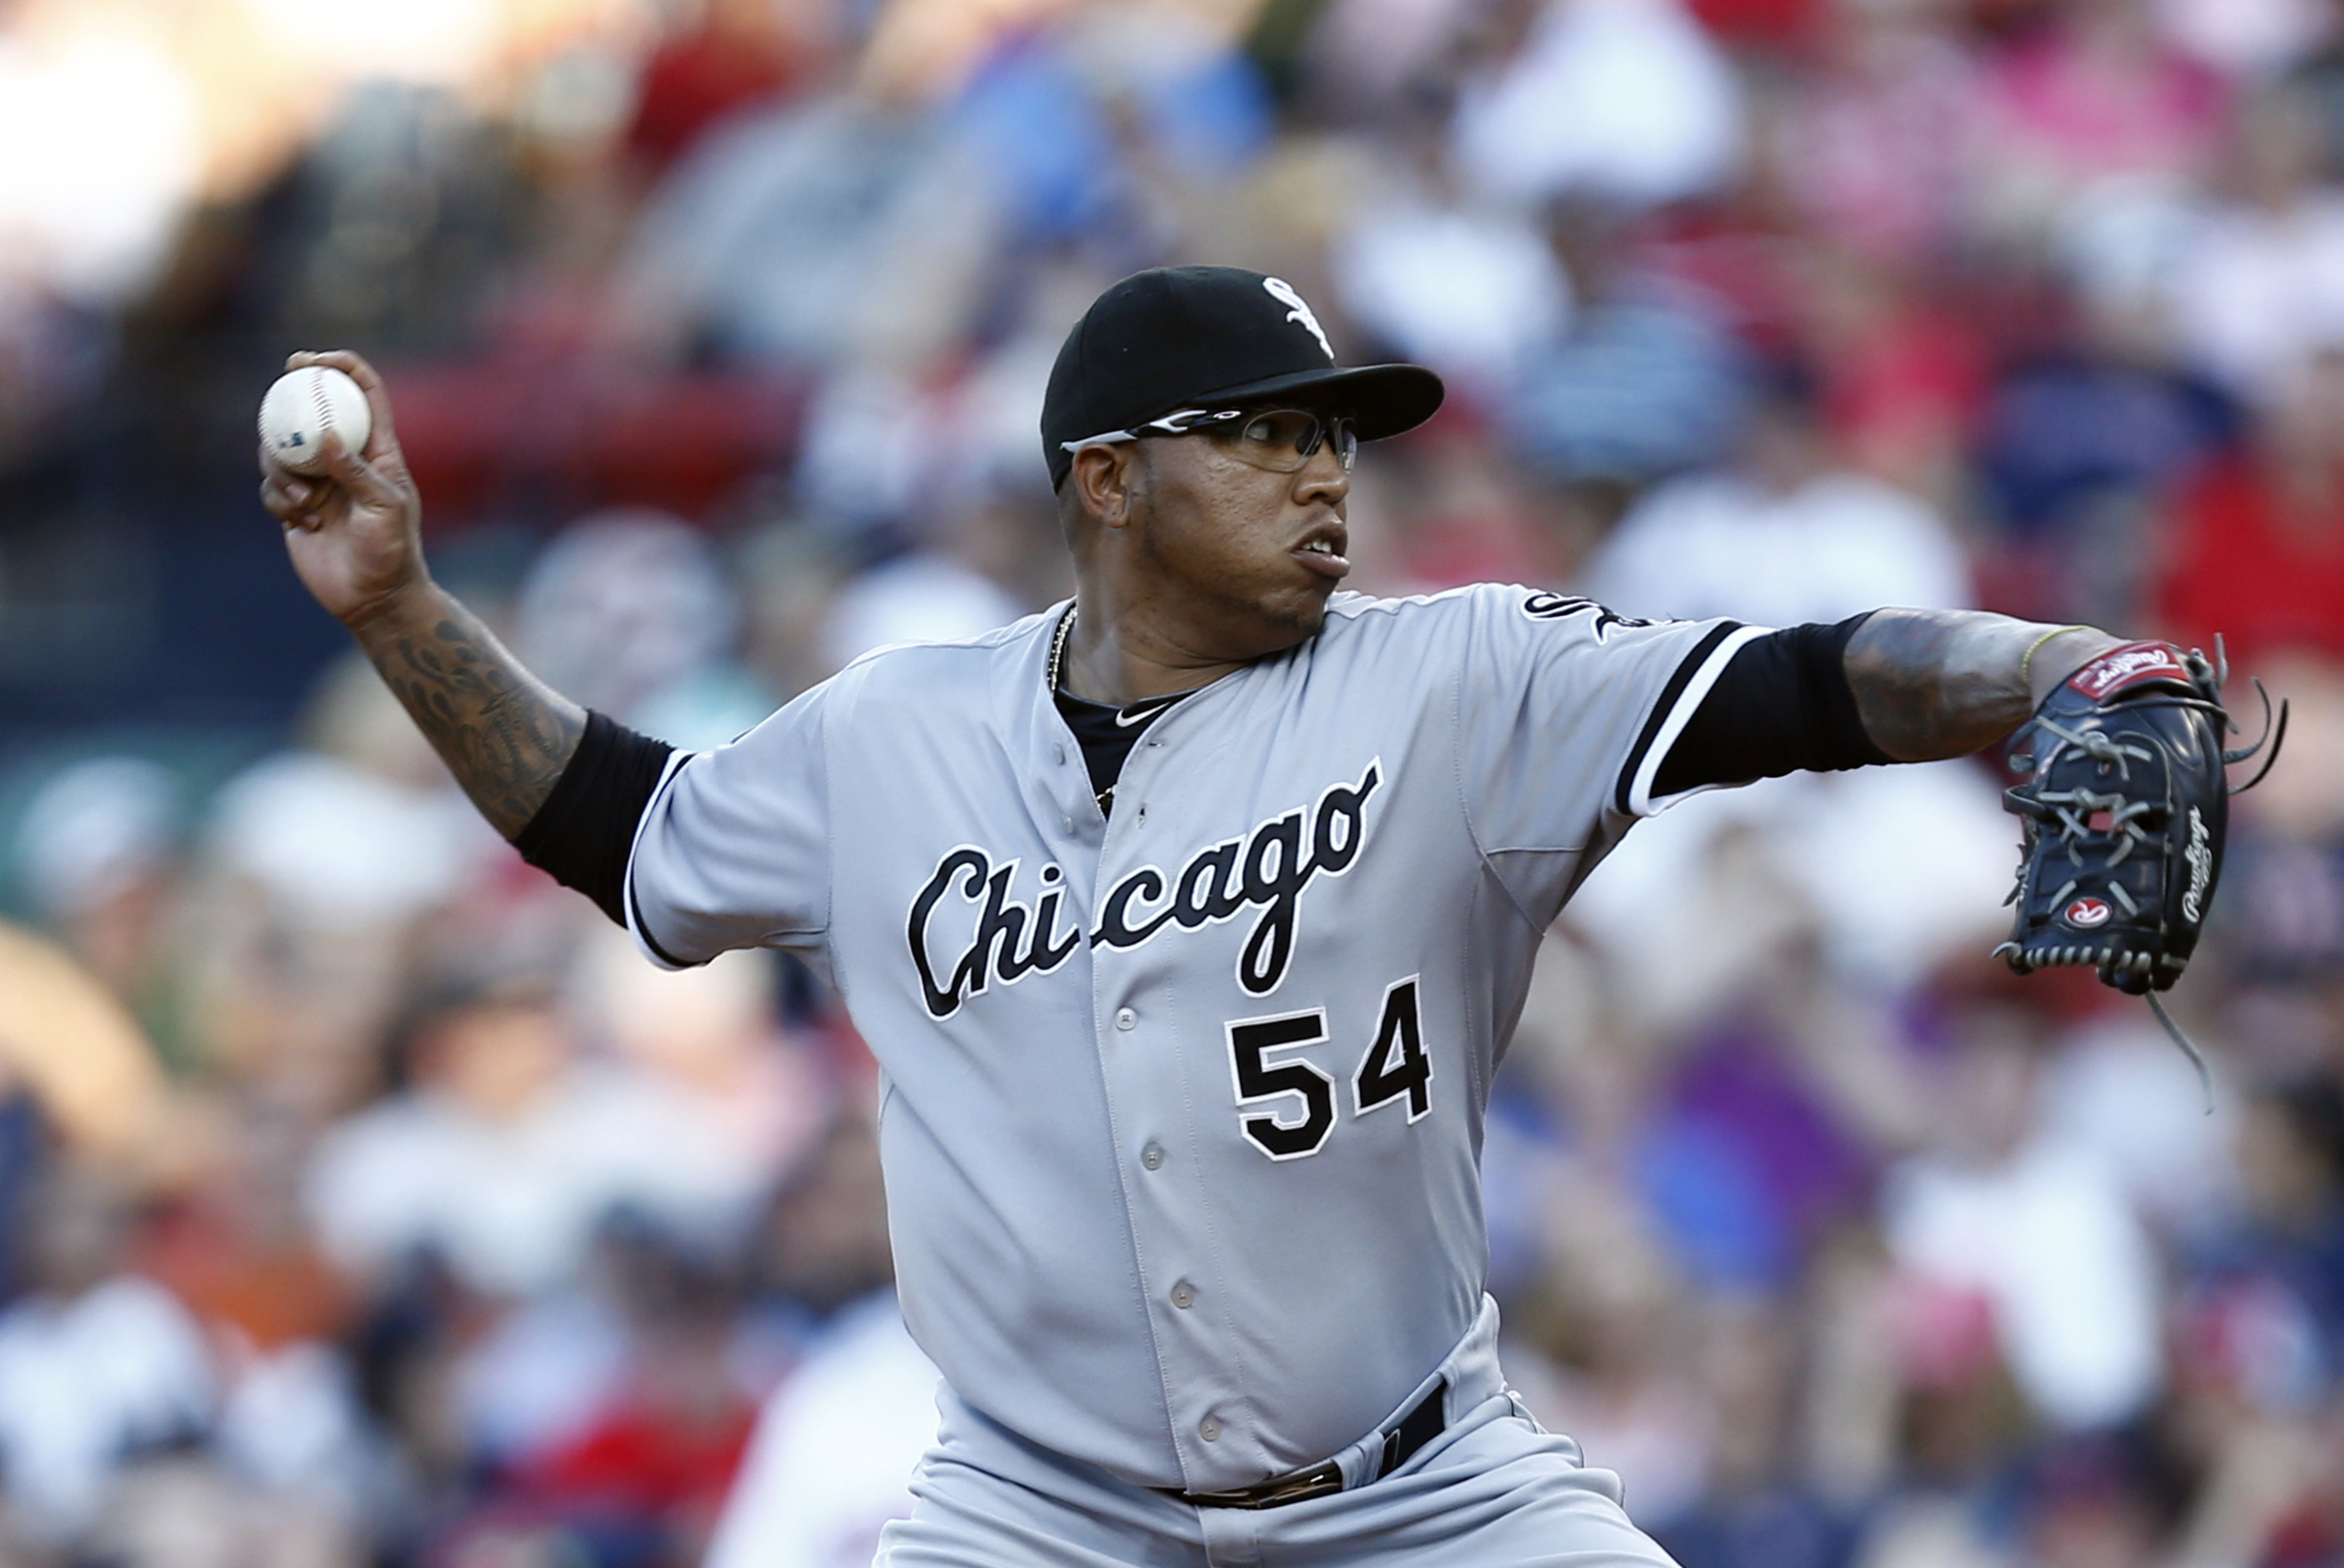 Ronald Belisario has turned out to be one of Chicago's top relievers.